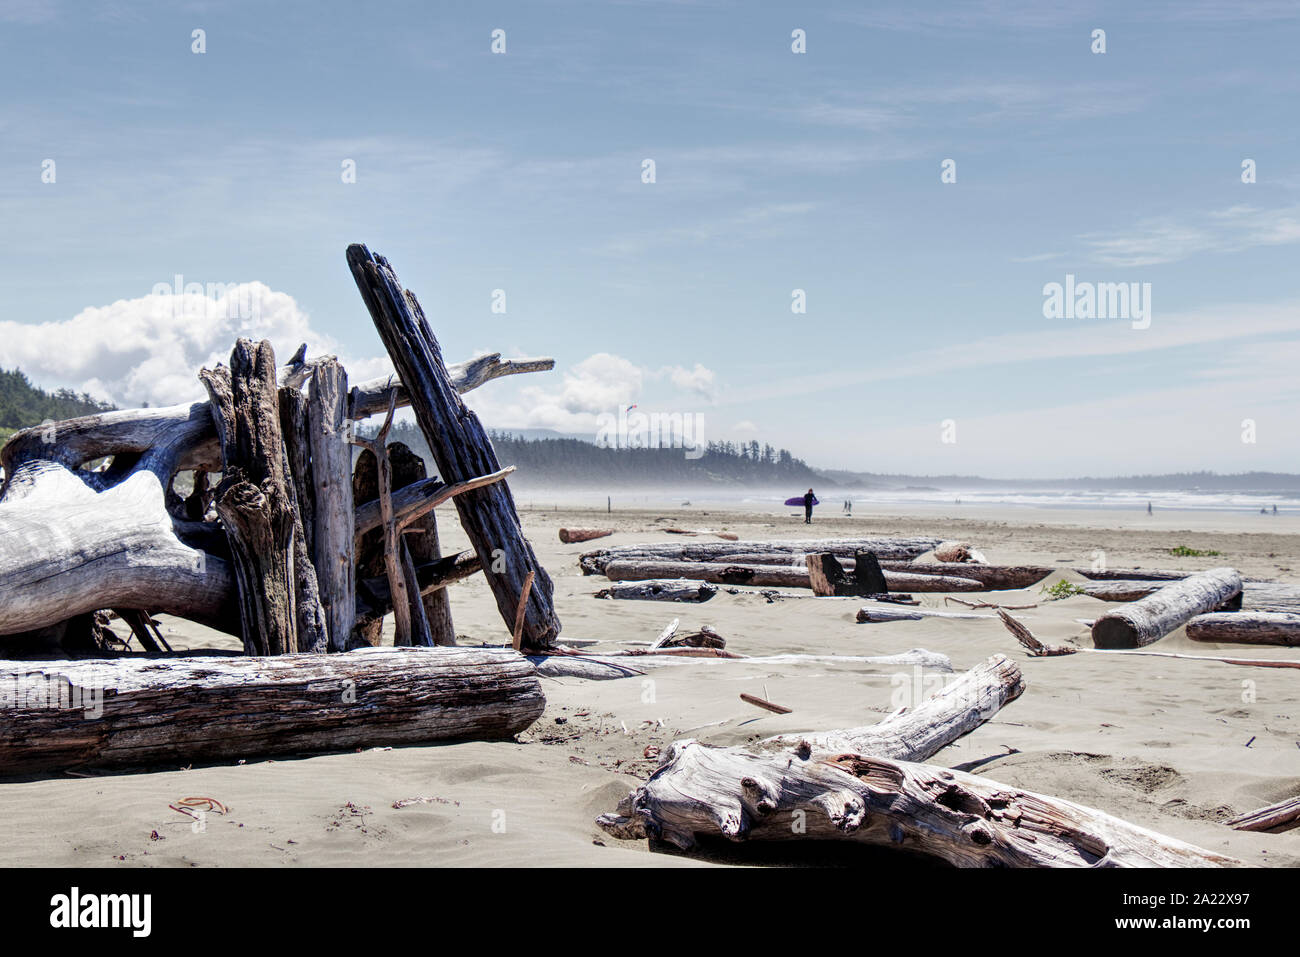 A shelter made from driftwood found on Long Beach near Tofino, Vancouver Island, Canada Stock Photo